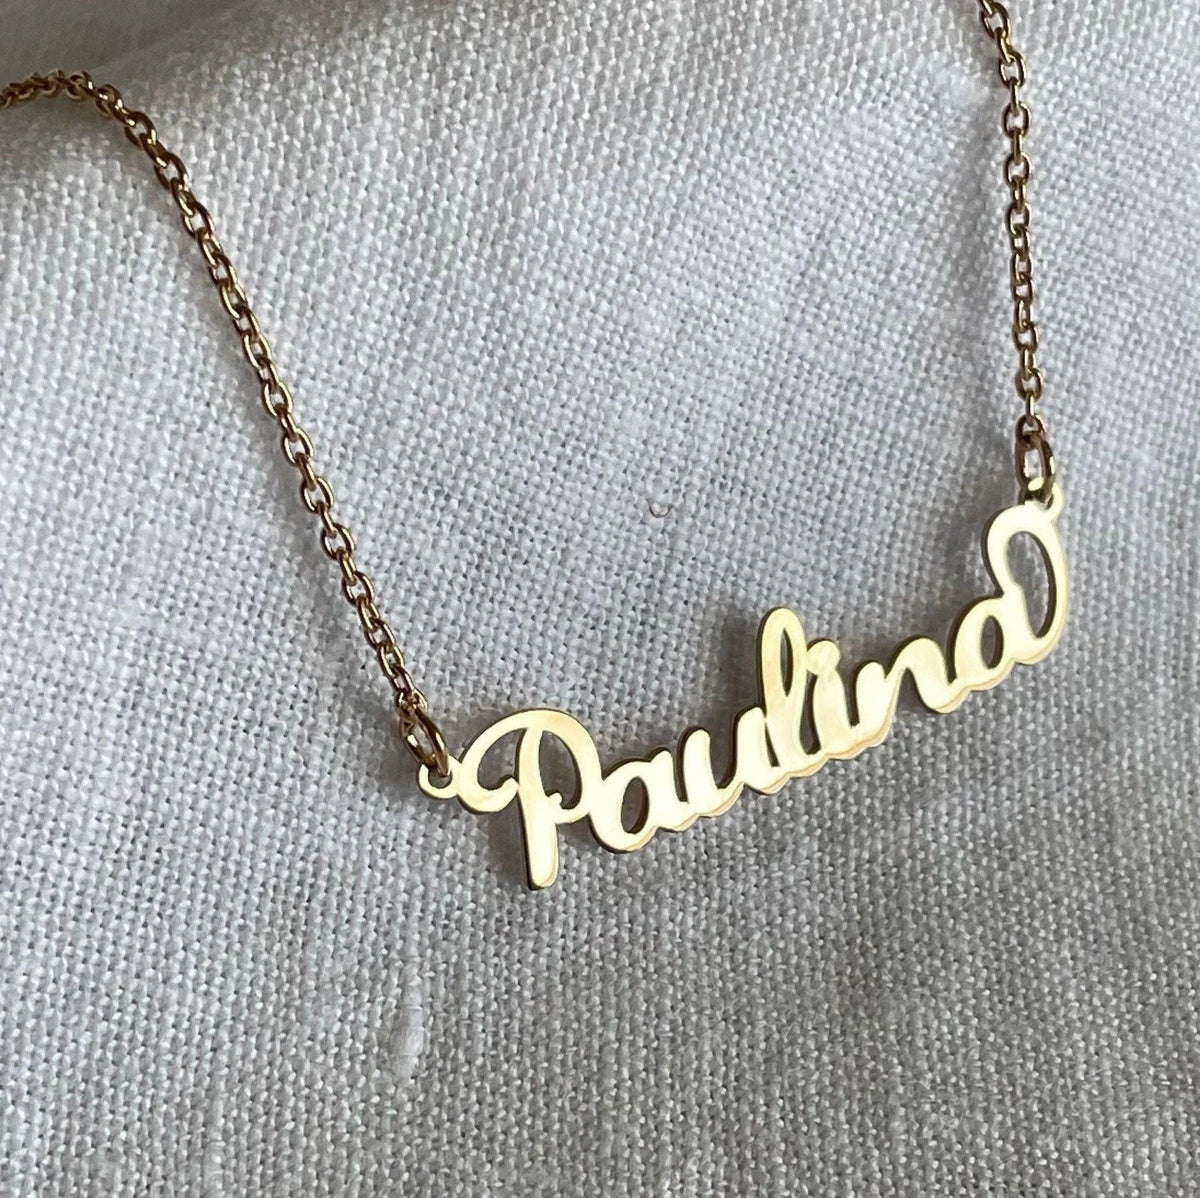 Cursive Name Necklace - Available in 10k, 14k, and Sterling Silver - Made to Order